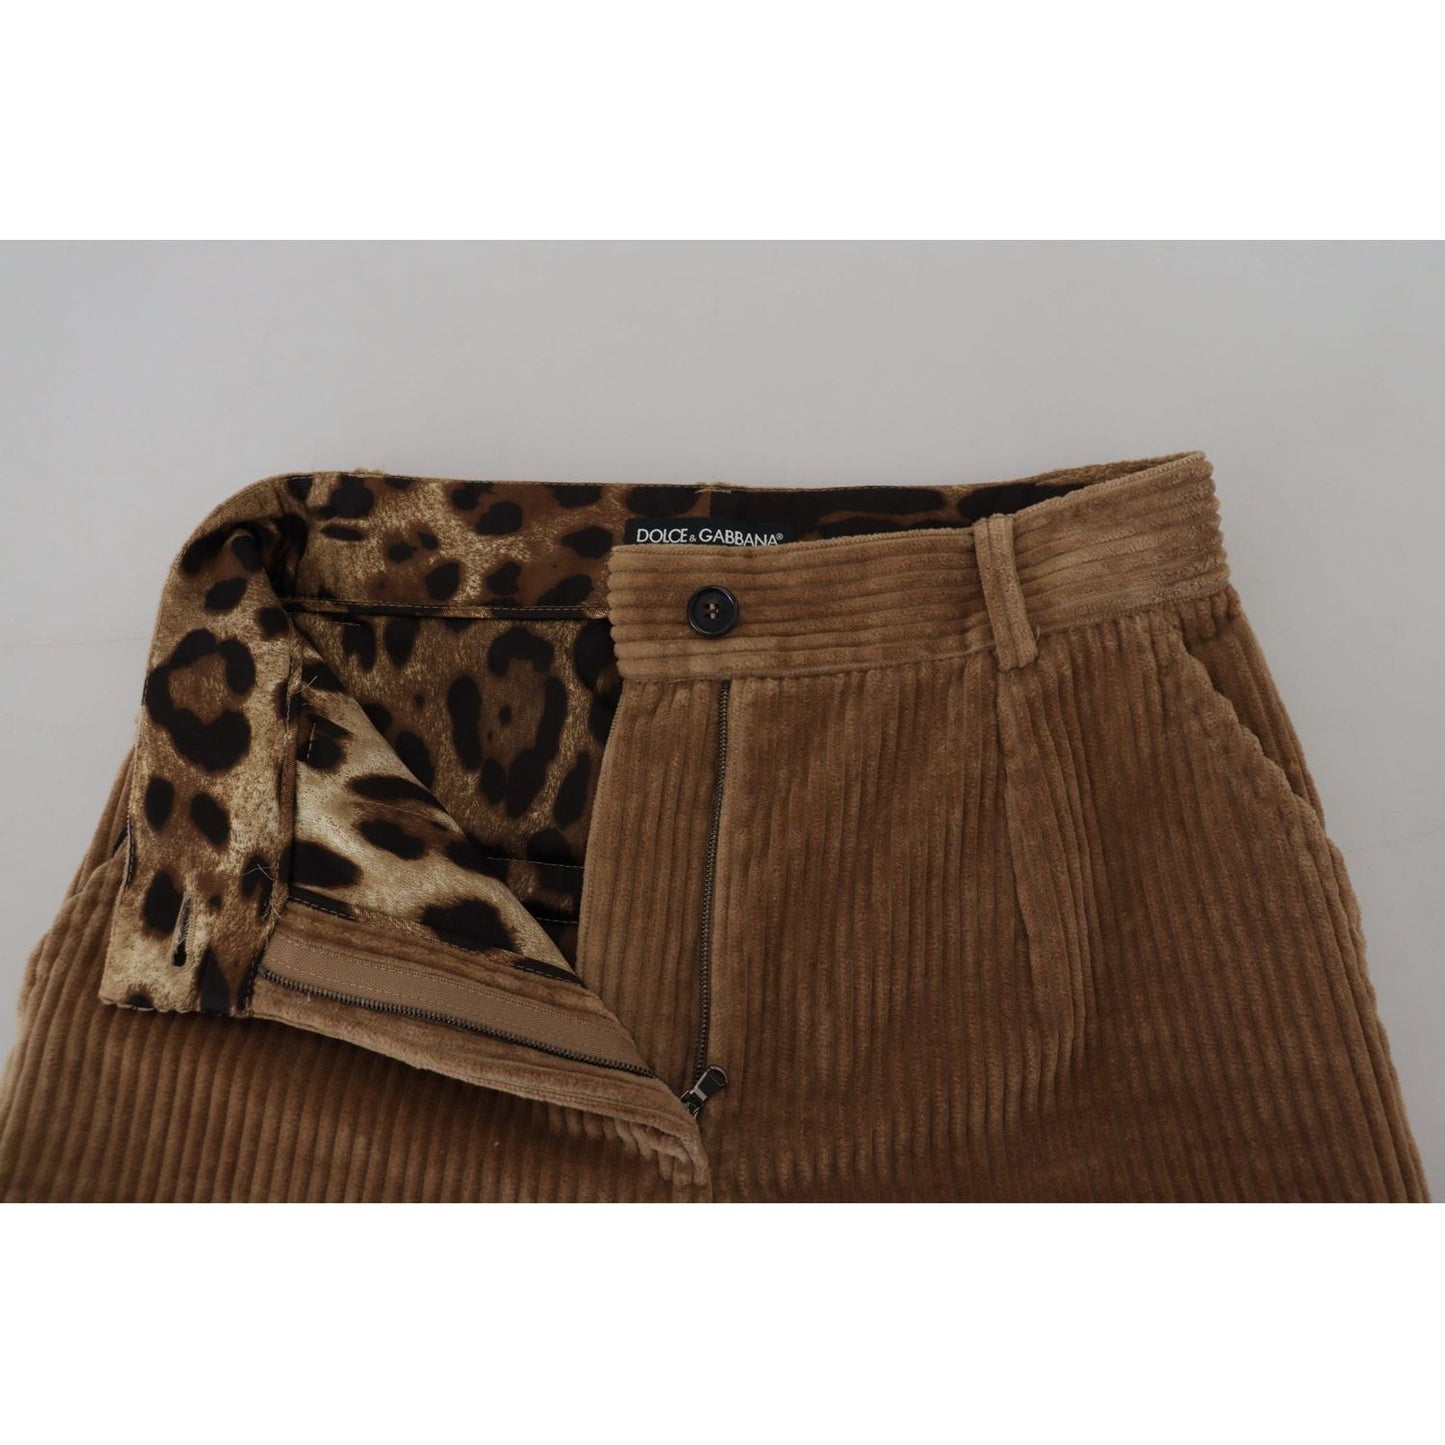 Dolce & Gabbana Elegant Brown Corduroy Pants for Sophisticated Style brown-tapered-corduroy-cotton-pants